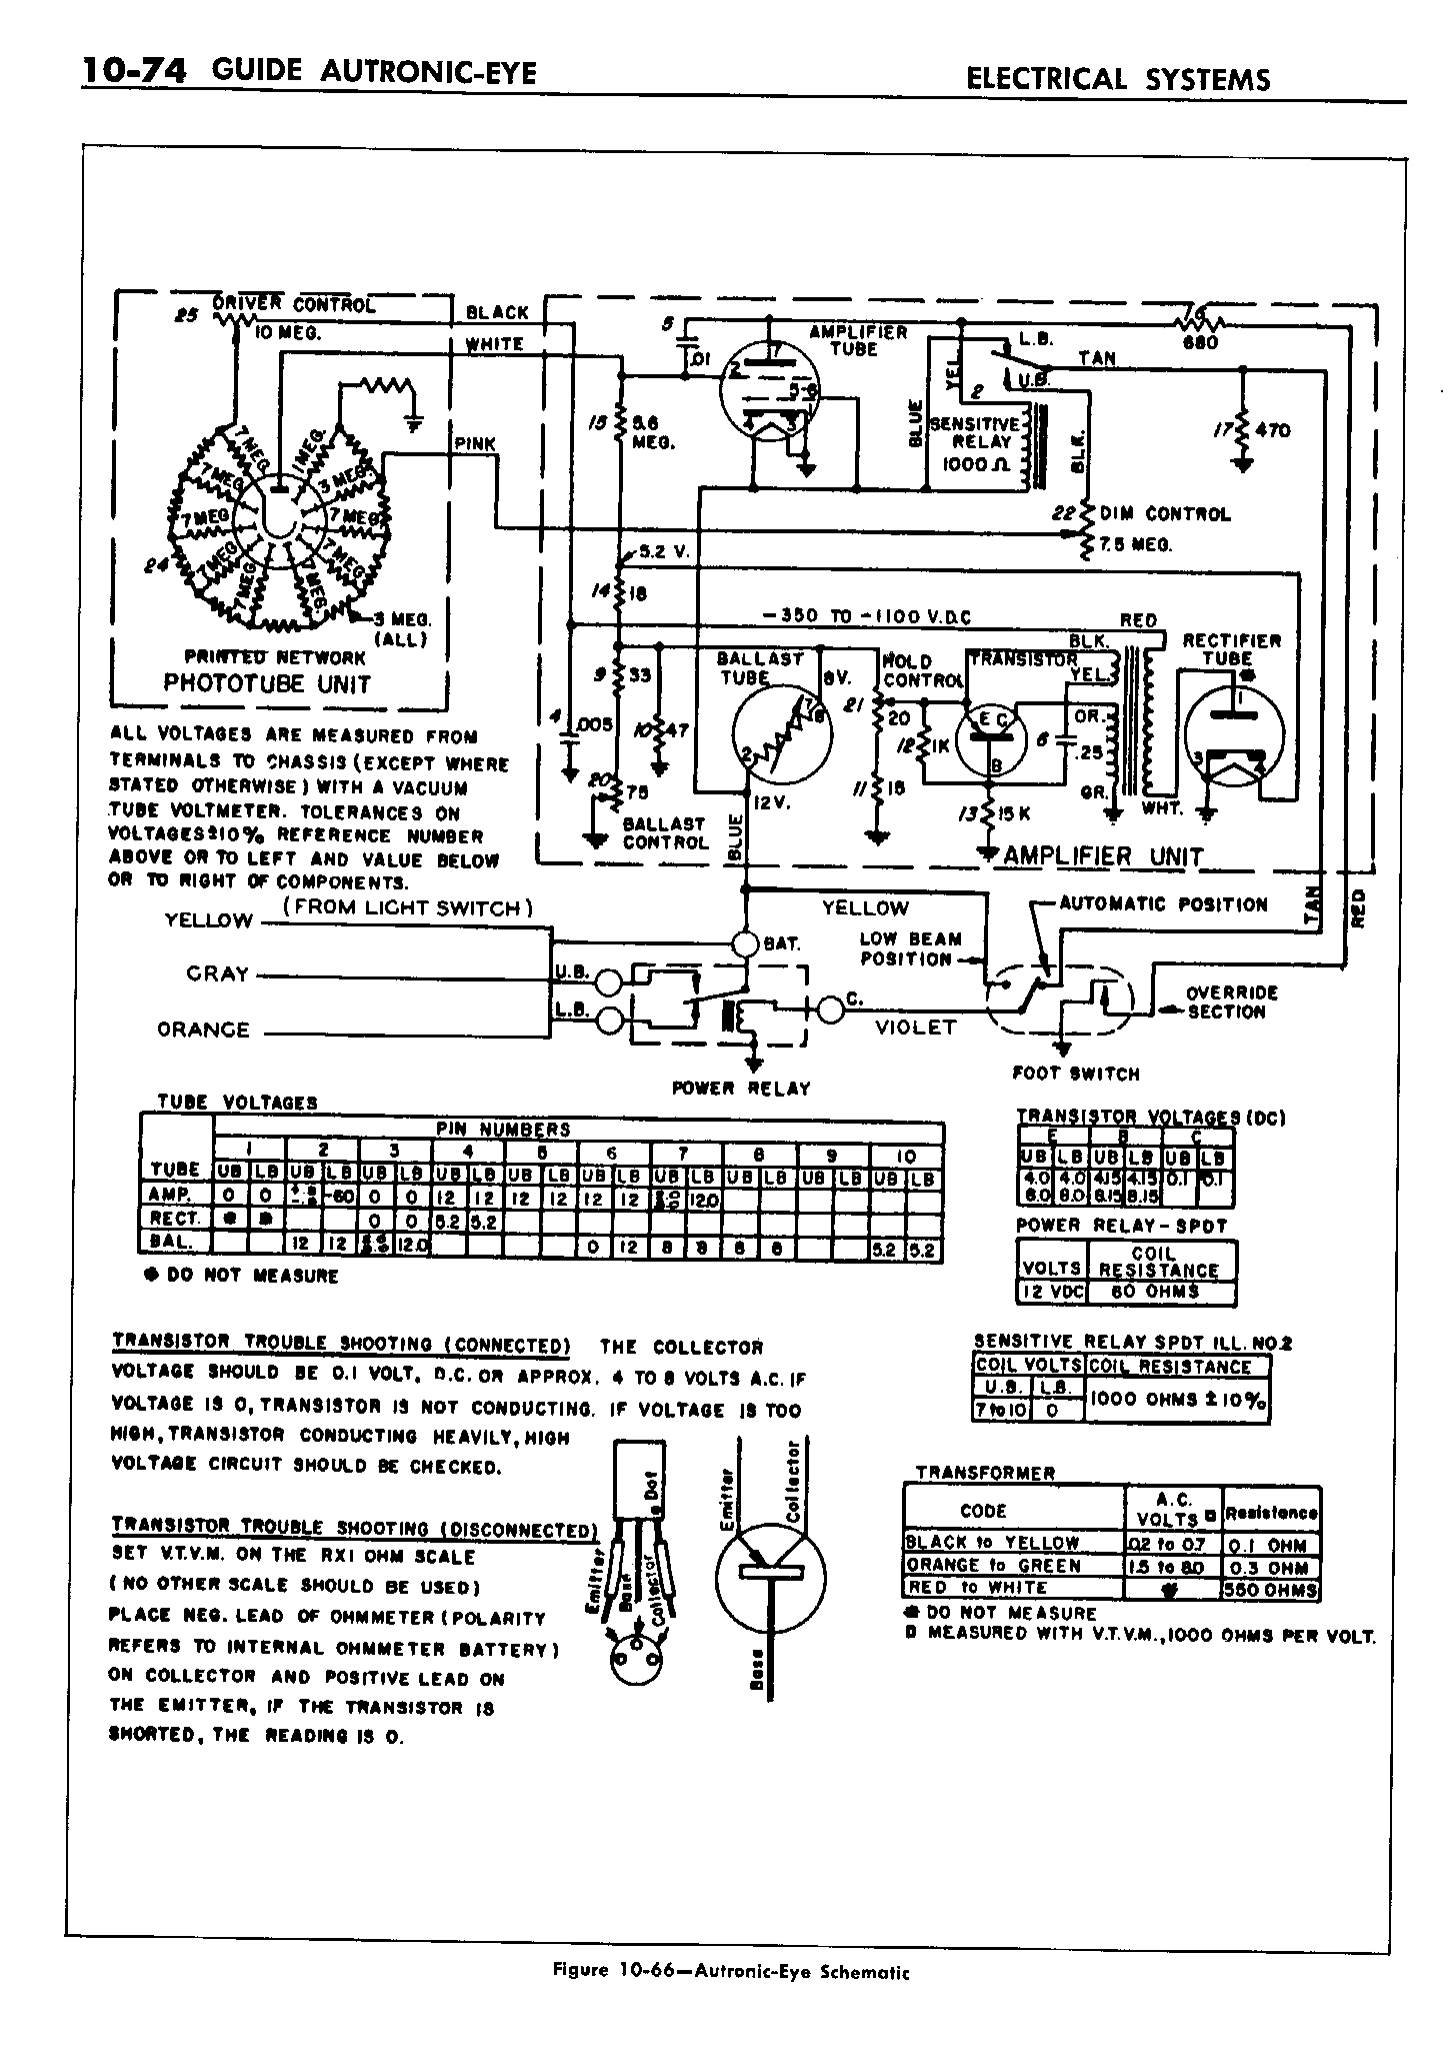 n_11 1958 Buick Shop Manual - Electrical Systems_74.jpg